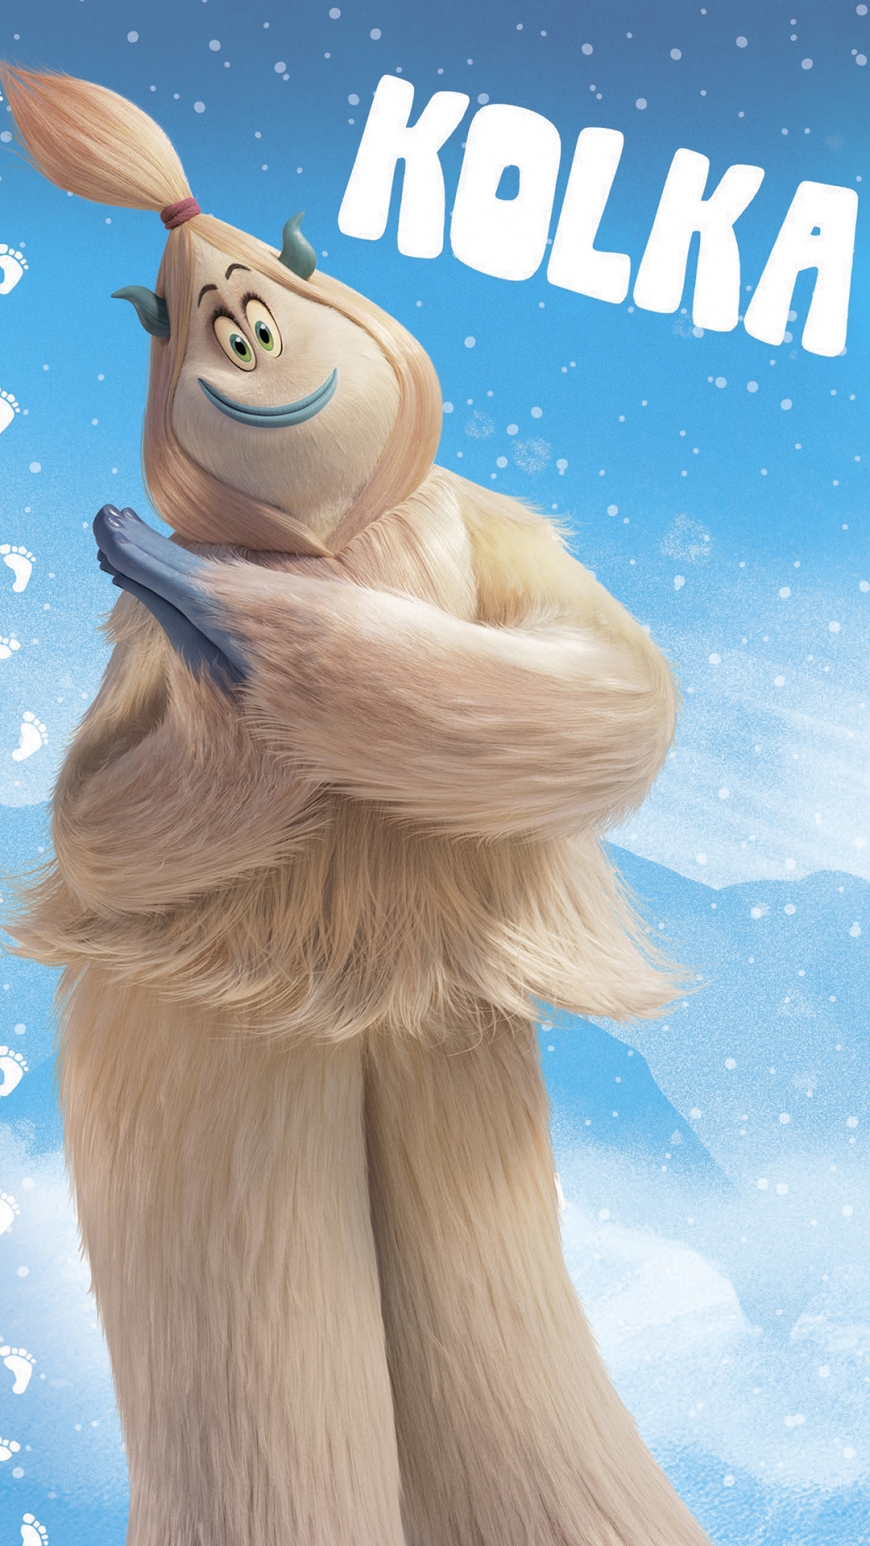 Smallfoot phone wallpapers